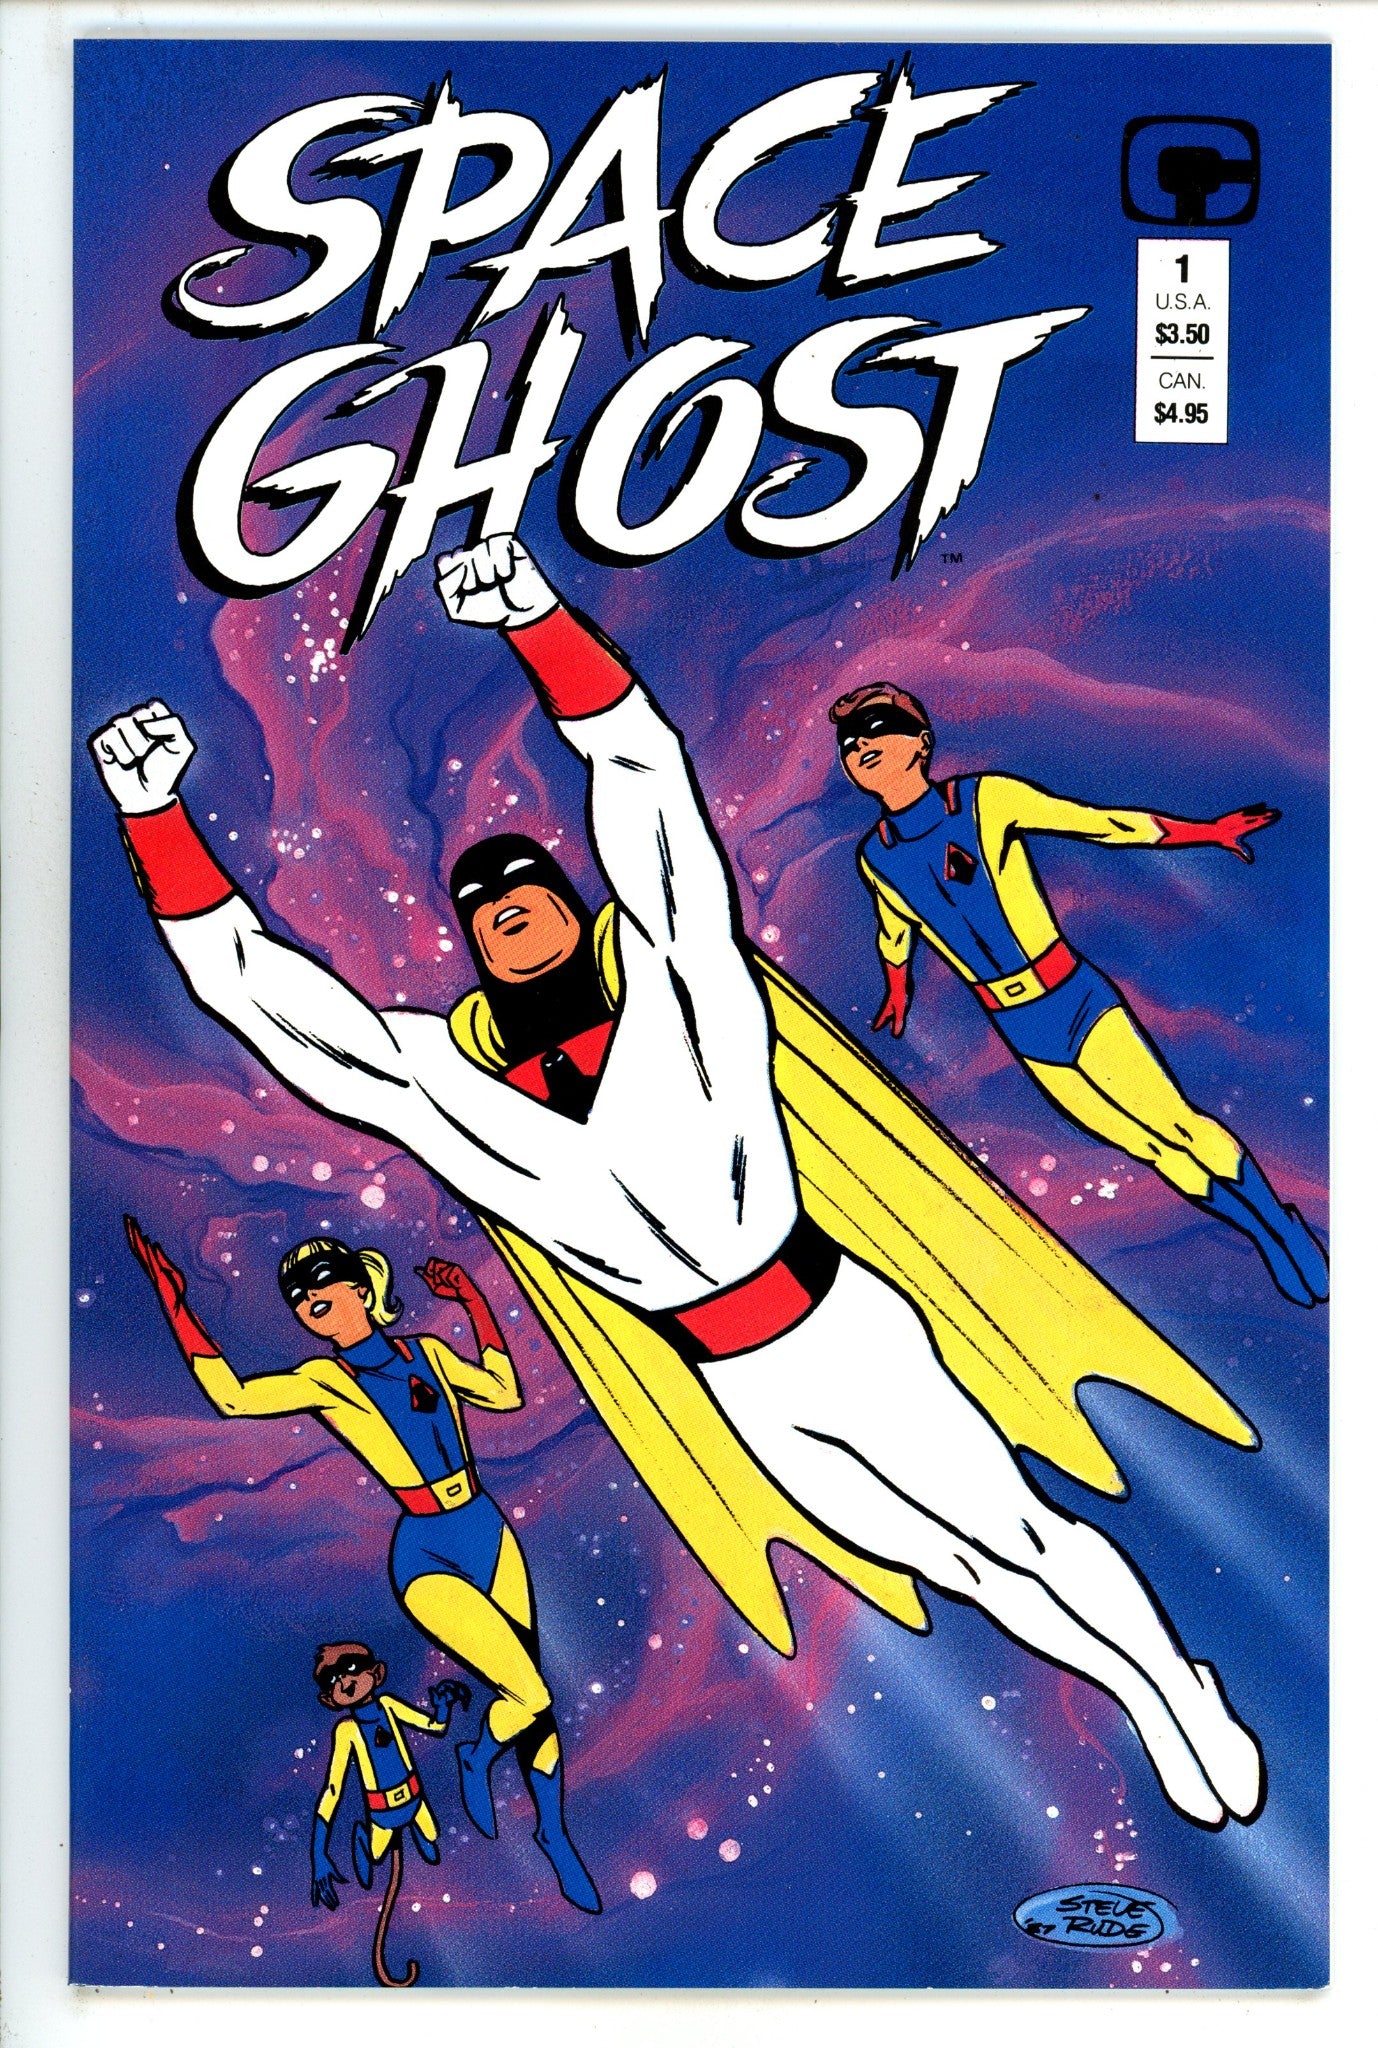 Space Ghost 1 NM- (9.2) (1987) 